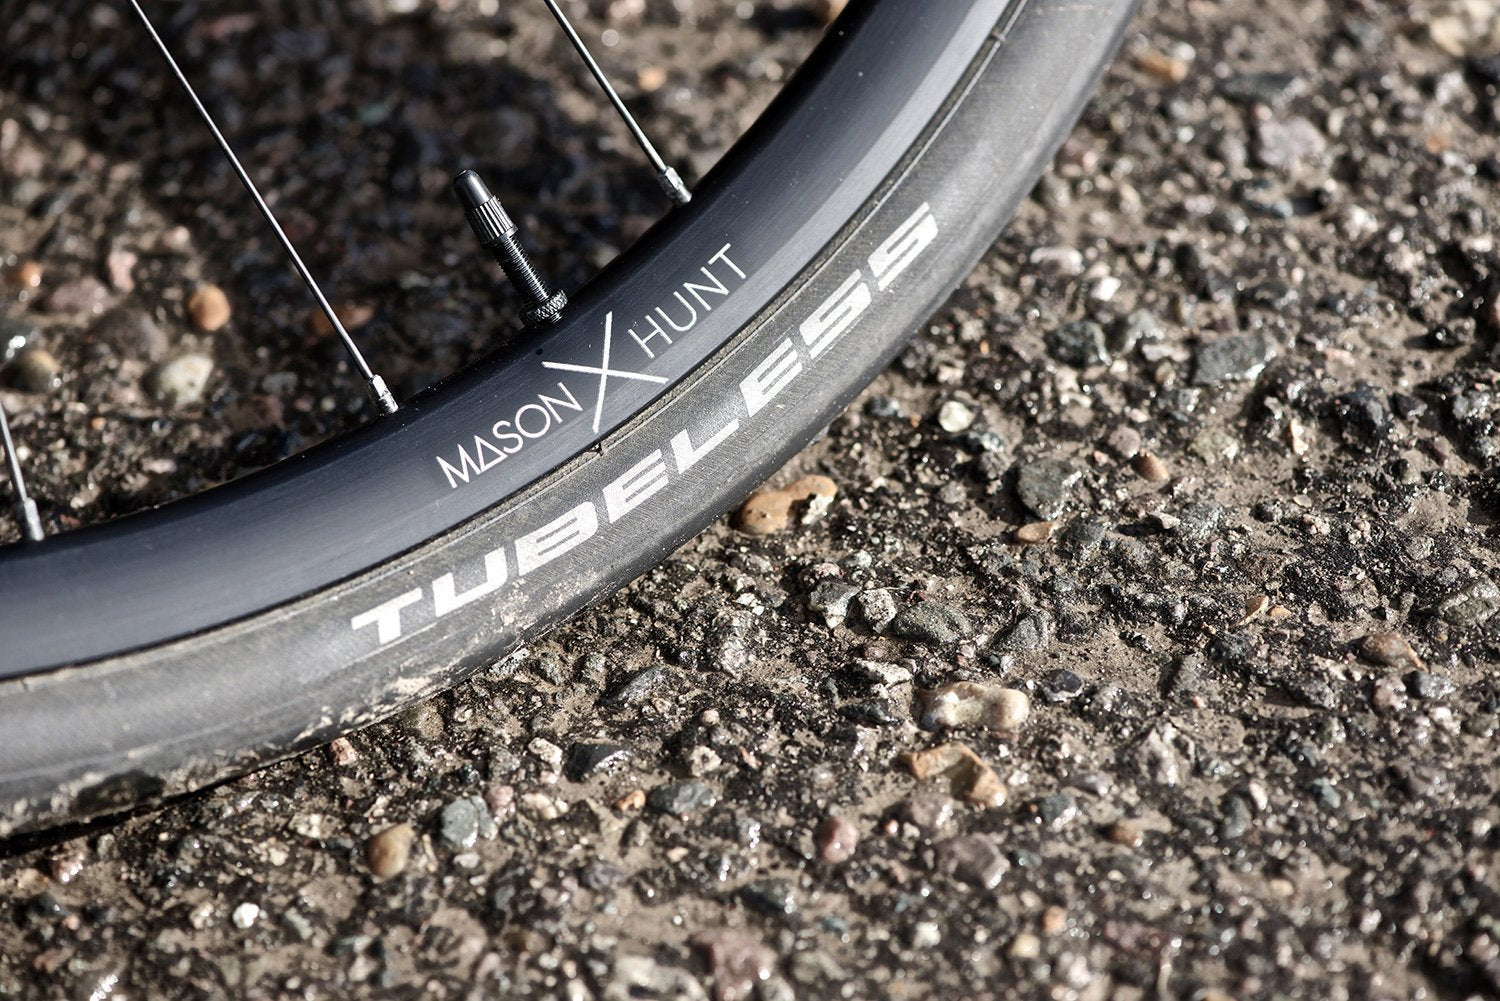 <html><h1>Tyres</h1><i>At HUNT, we enjoy the puncture resistance and grip benefits of tubeless on our every-day rides so we wanted to allow our customers the same option. Of course, all of our tubeless-ready wheels are designed to work perfectly with clincher tyres and inner tubes too.</i></html>